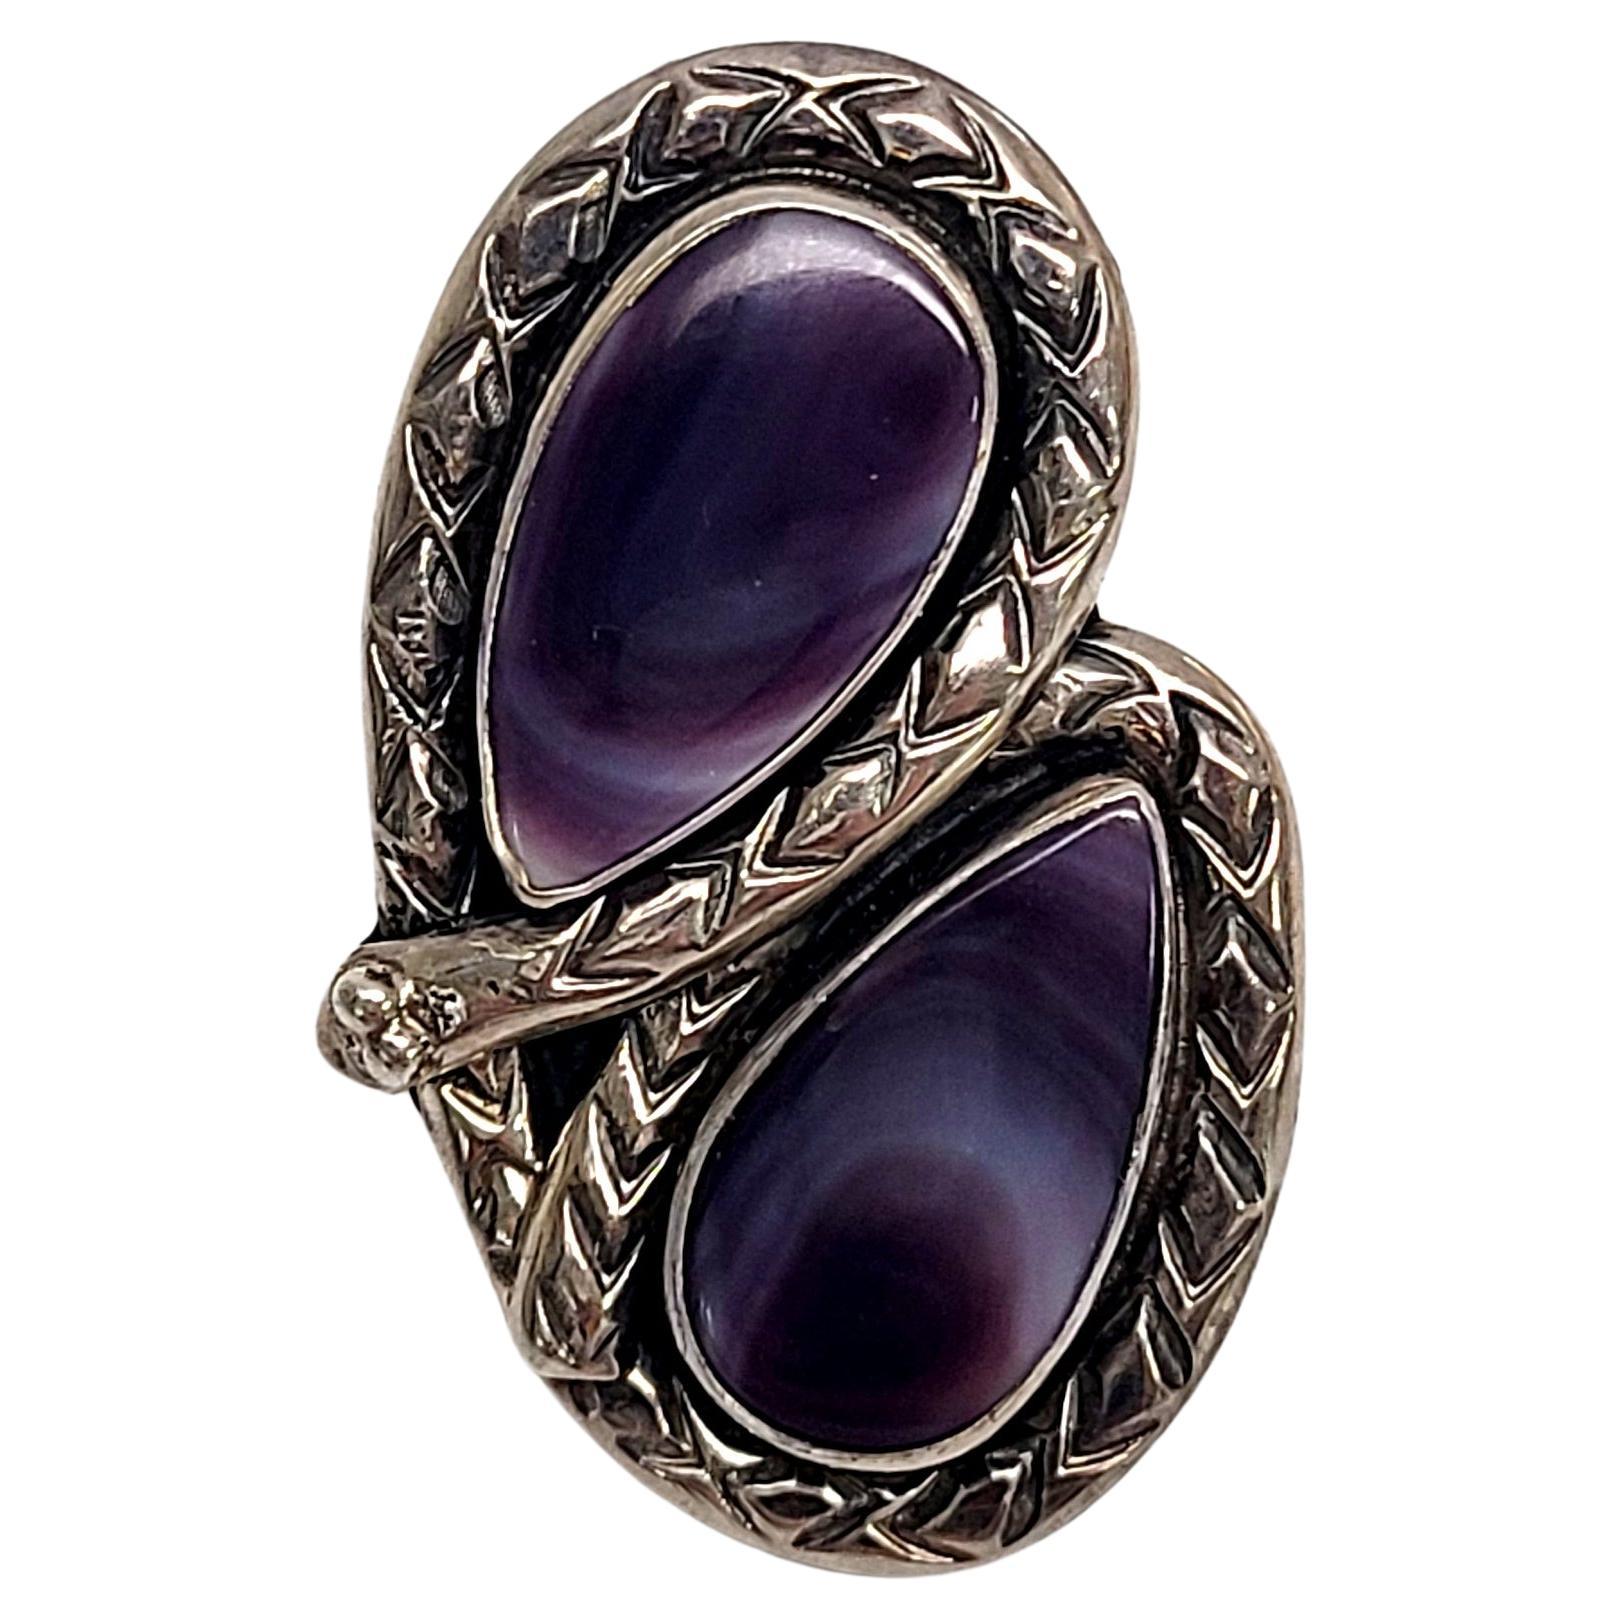 Native American Signed HTS Sterling Silver Purple Cabochon Snake Ring